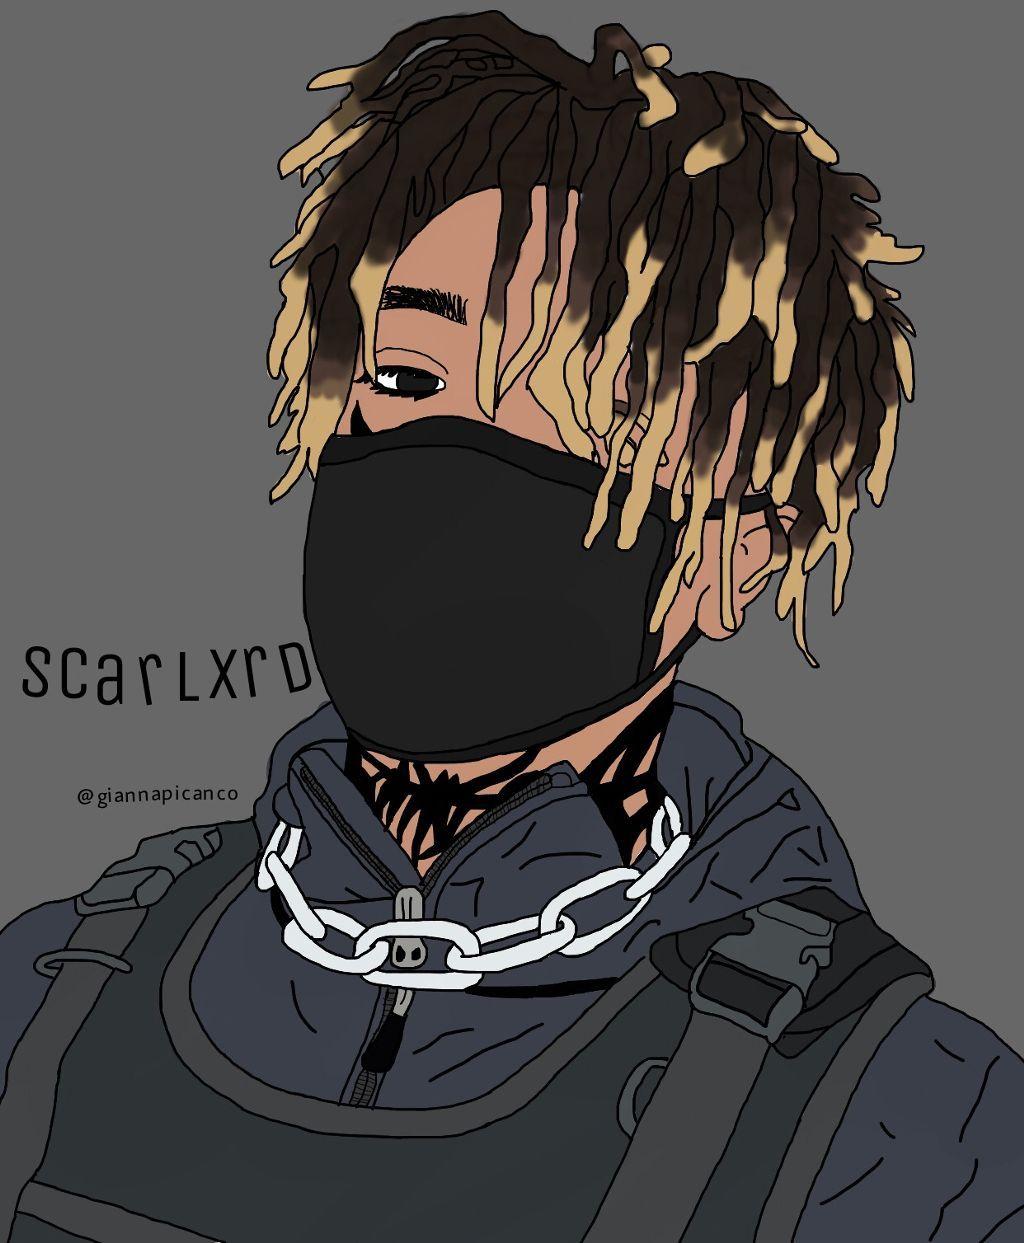 Scarlxrd Anime Wallpapers - Wallpaper Cave